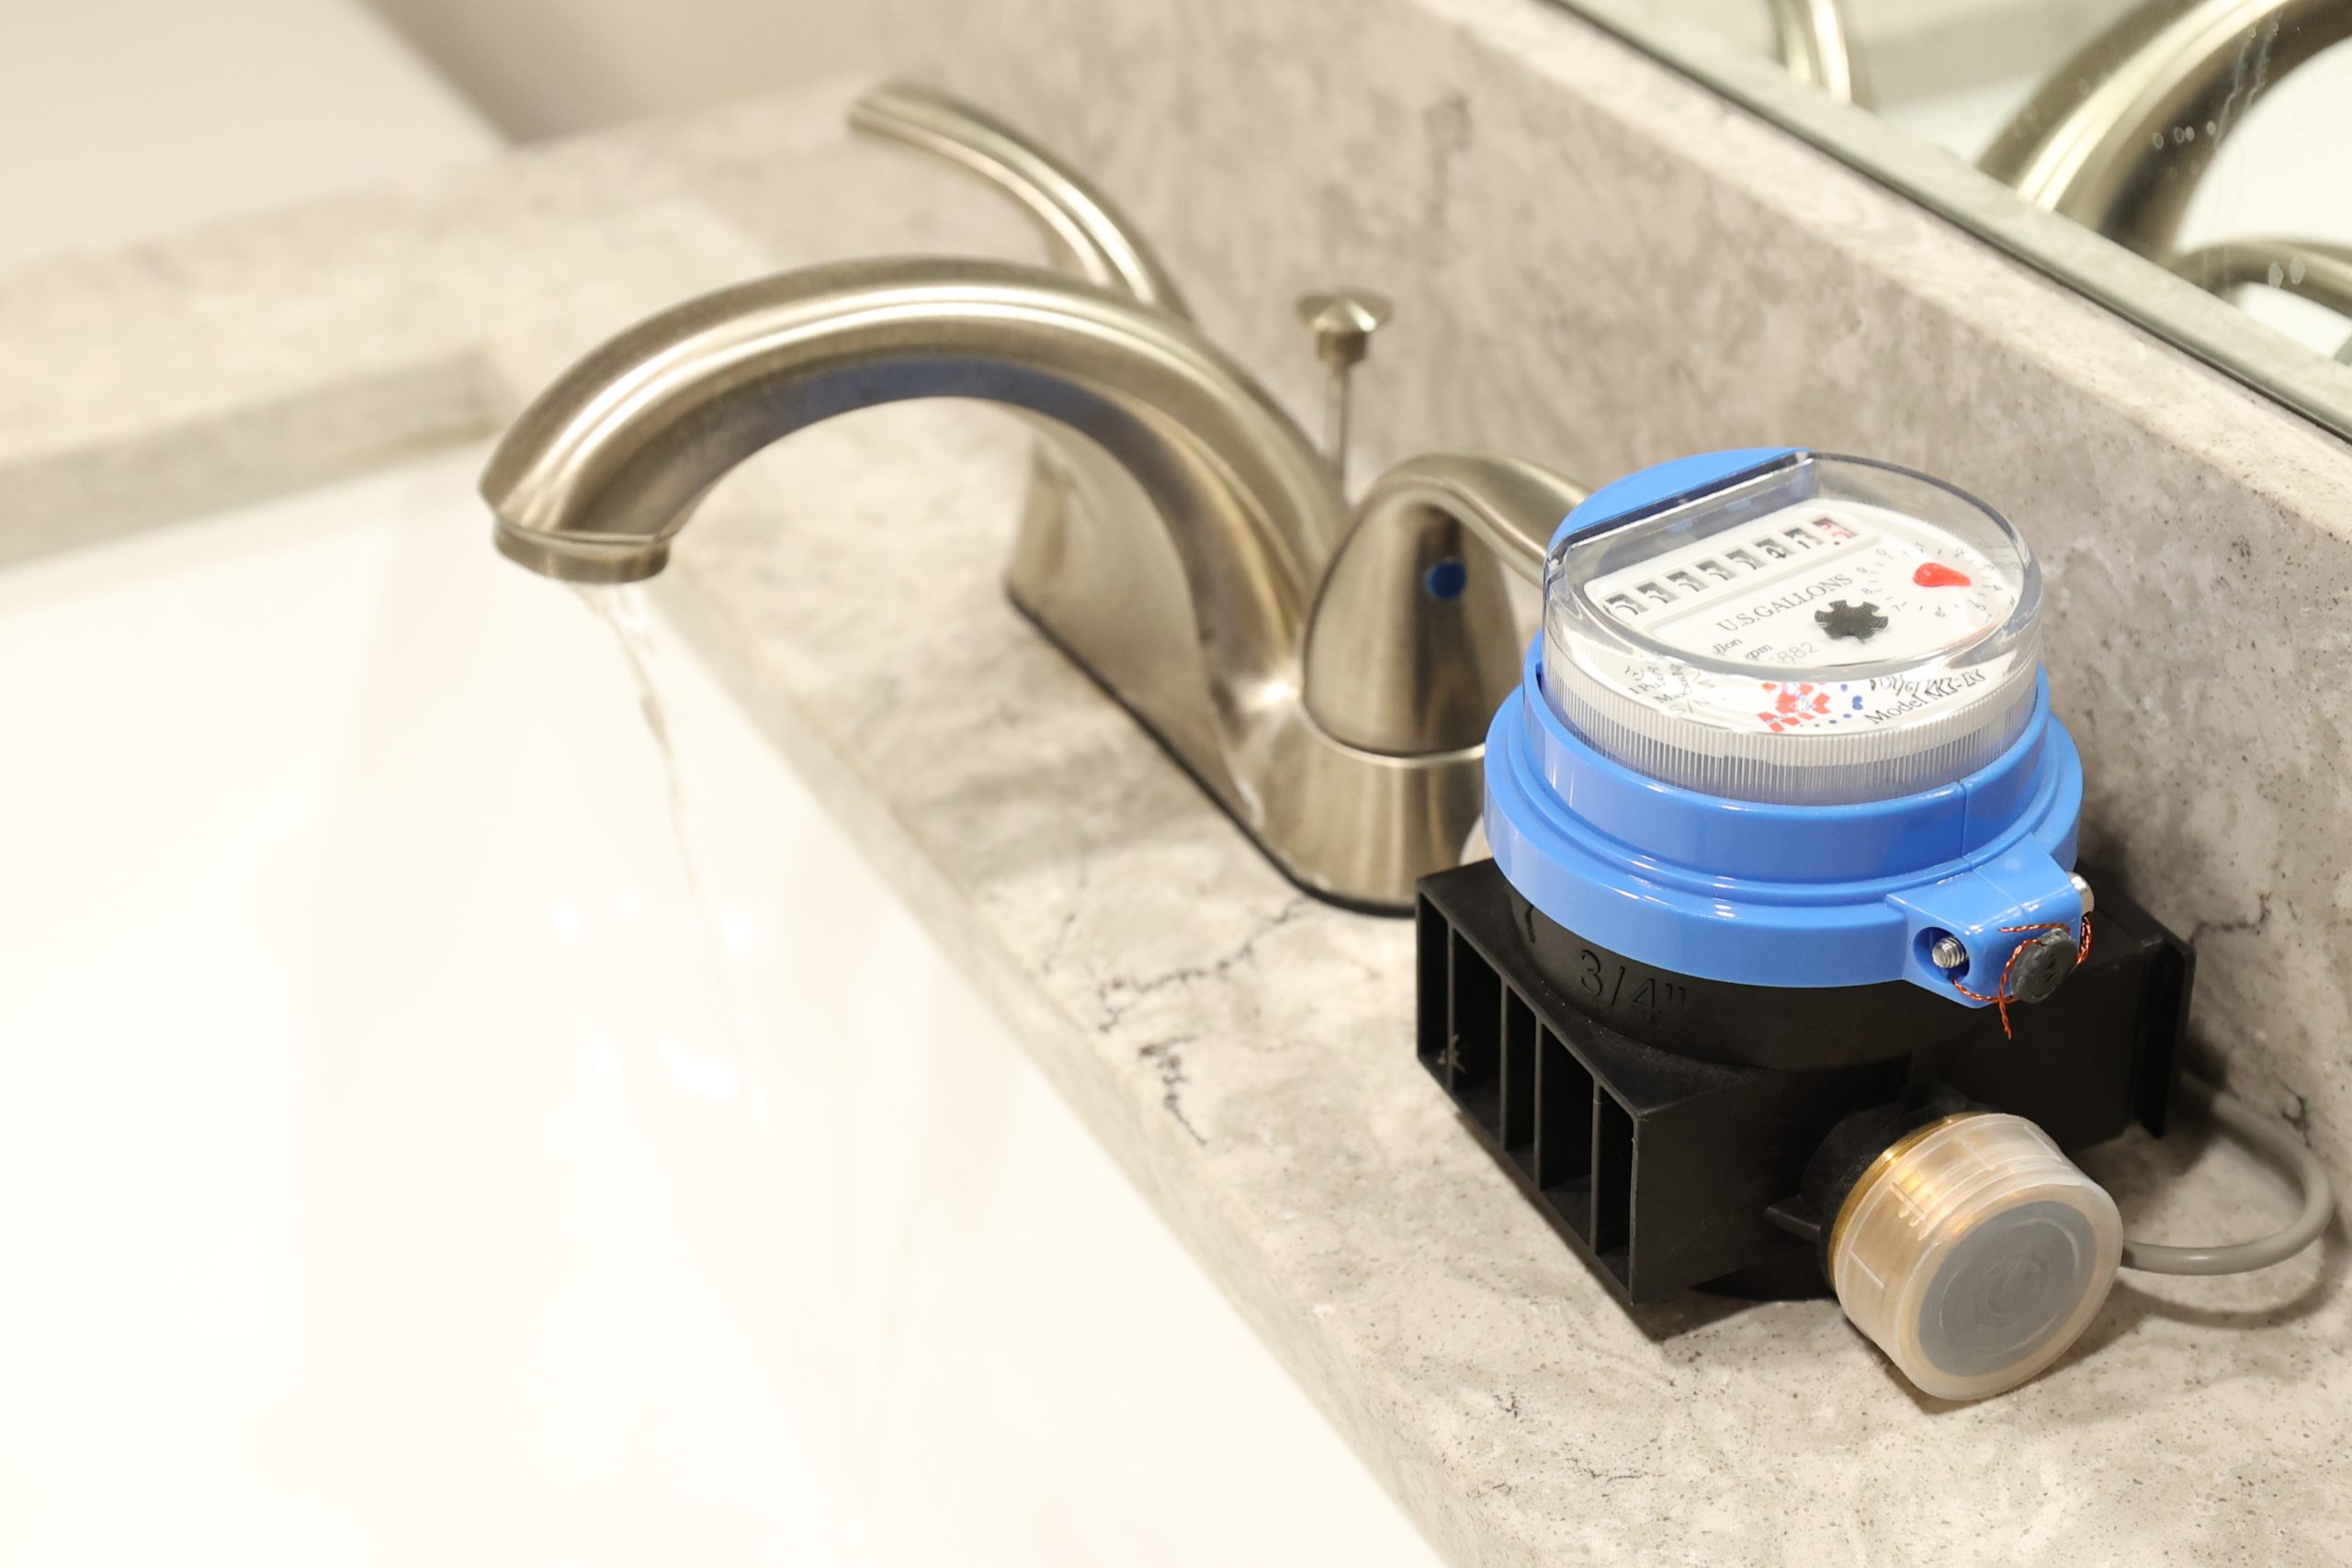 Submeter near water faucet